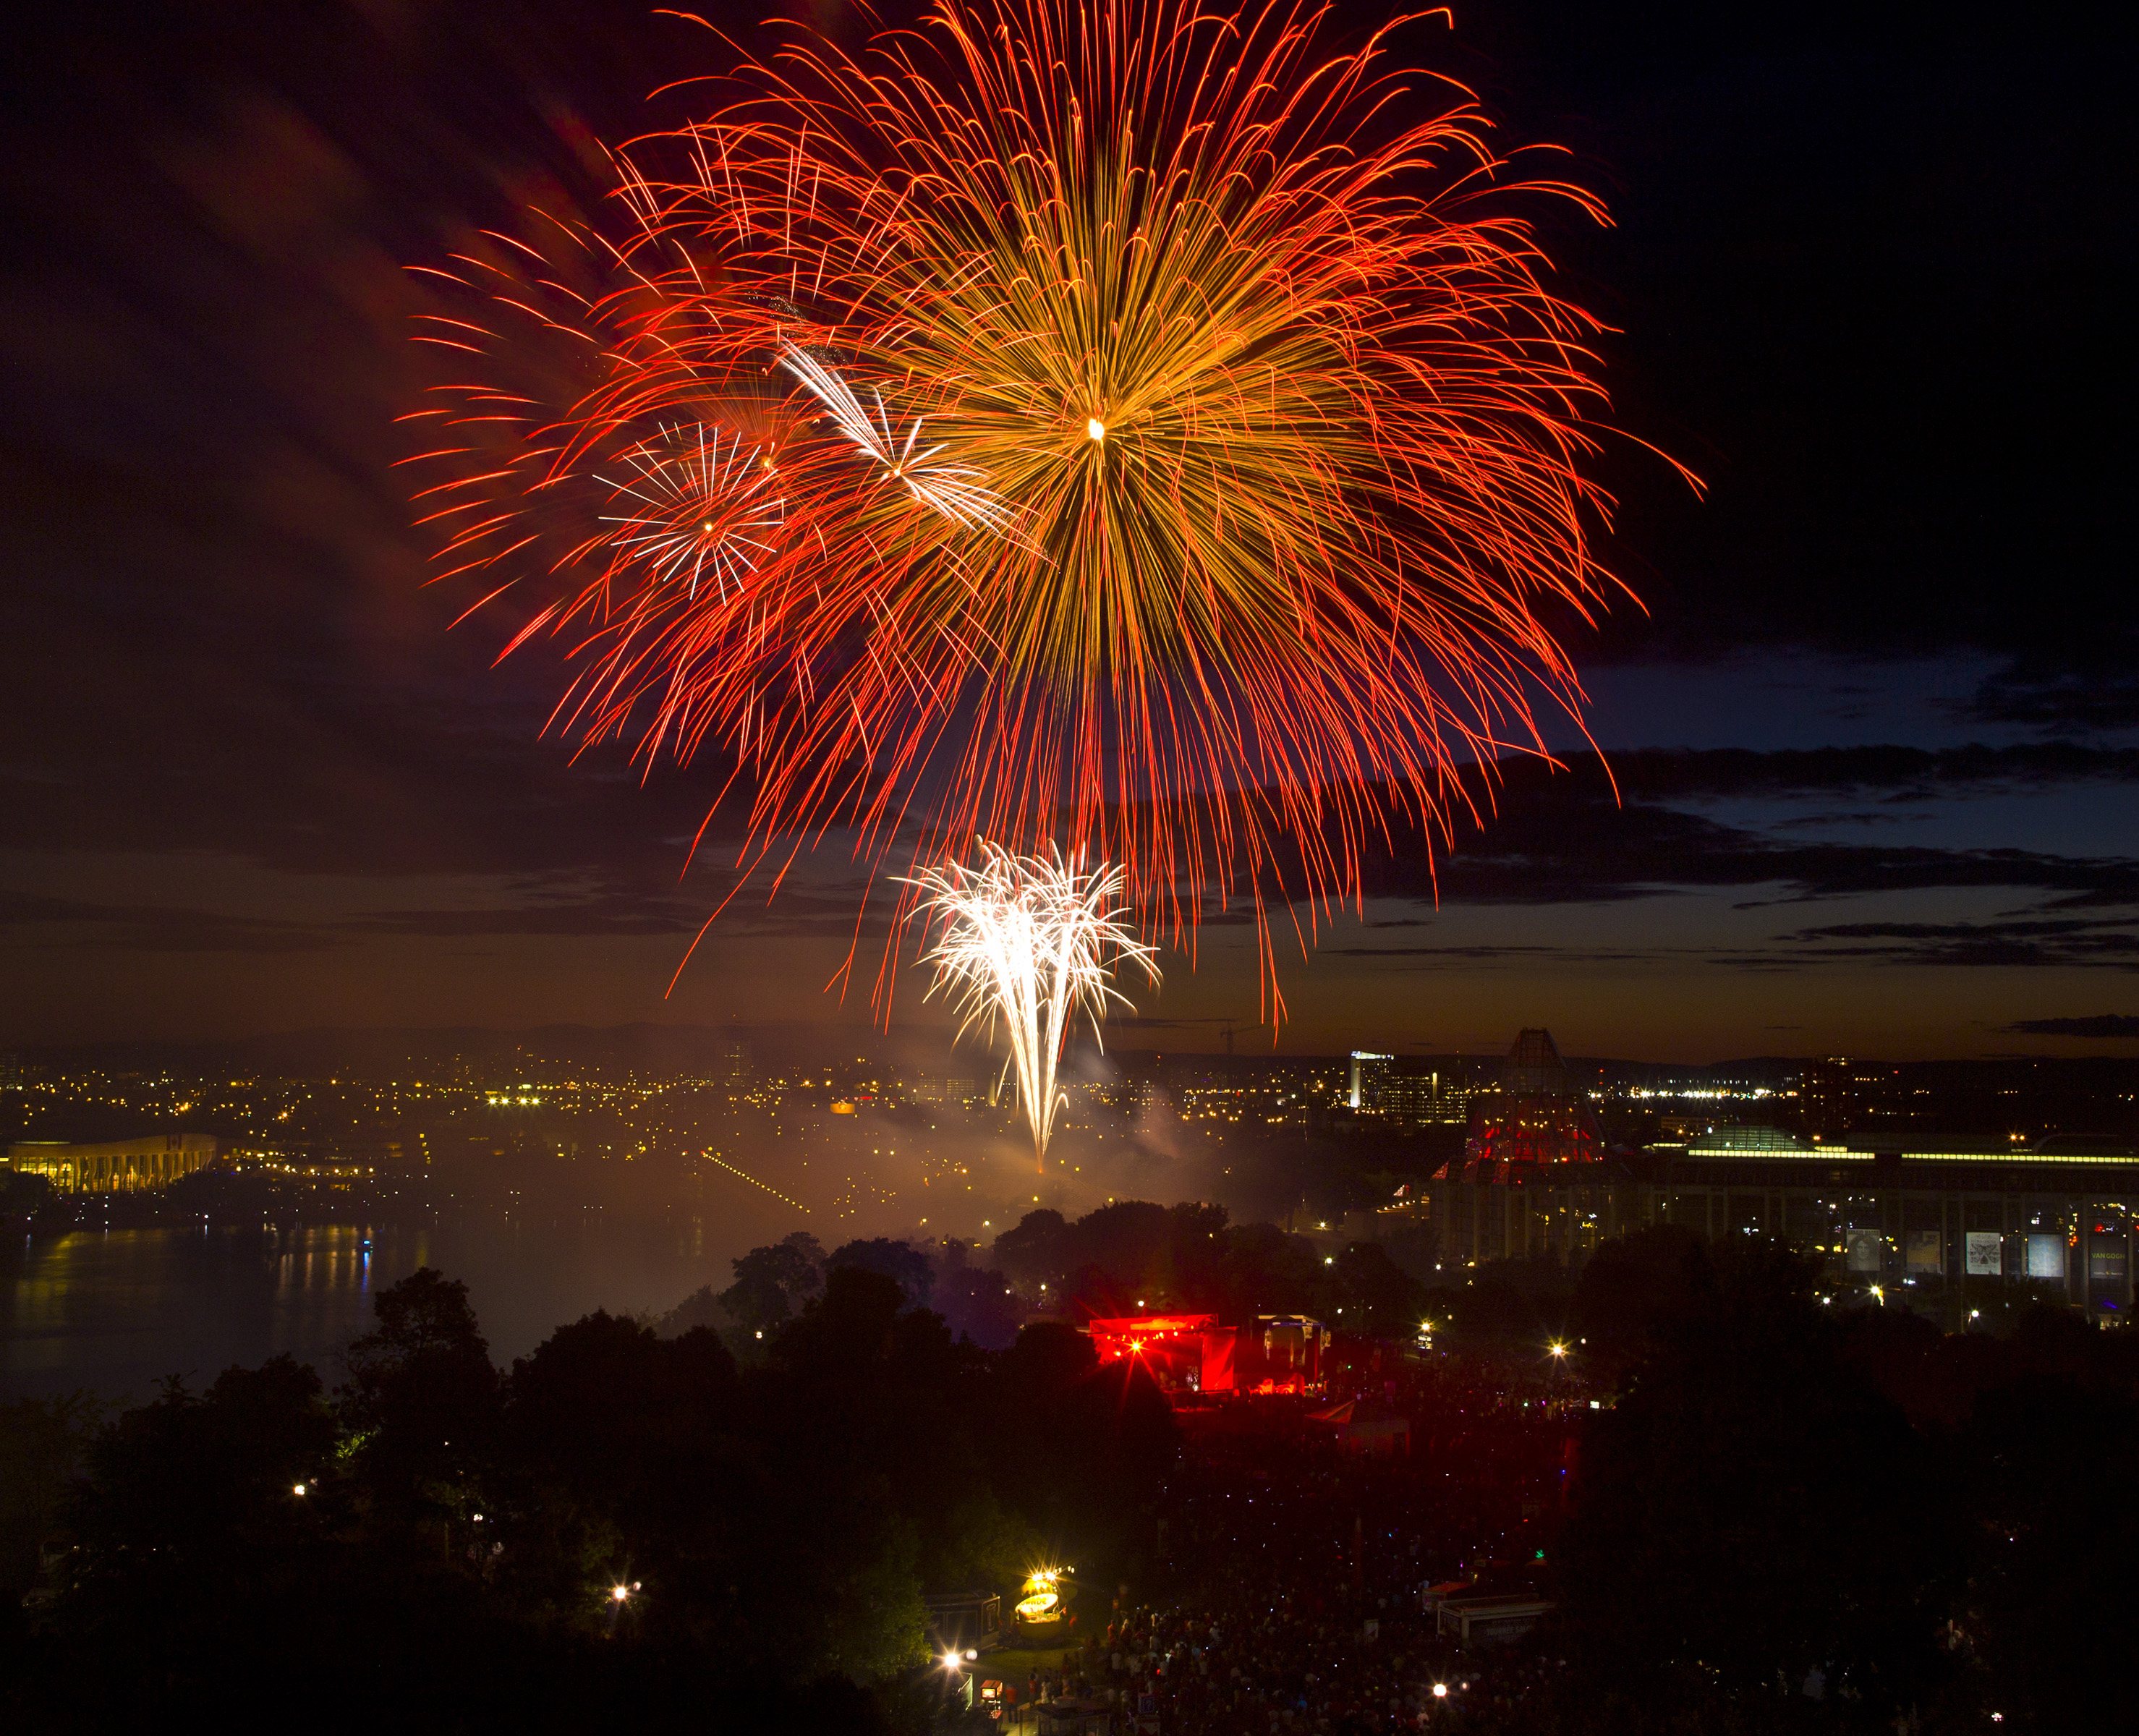 A fireworks display over the Alexandra Bridge and National Gallery as viewed from Parliament Hill as thousands gather to celebrate Canada Day on July 1, 2012, in Ottawa, Canada. (George Rose—Getty Images)